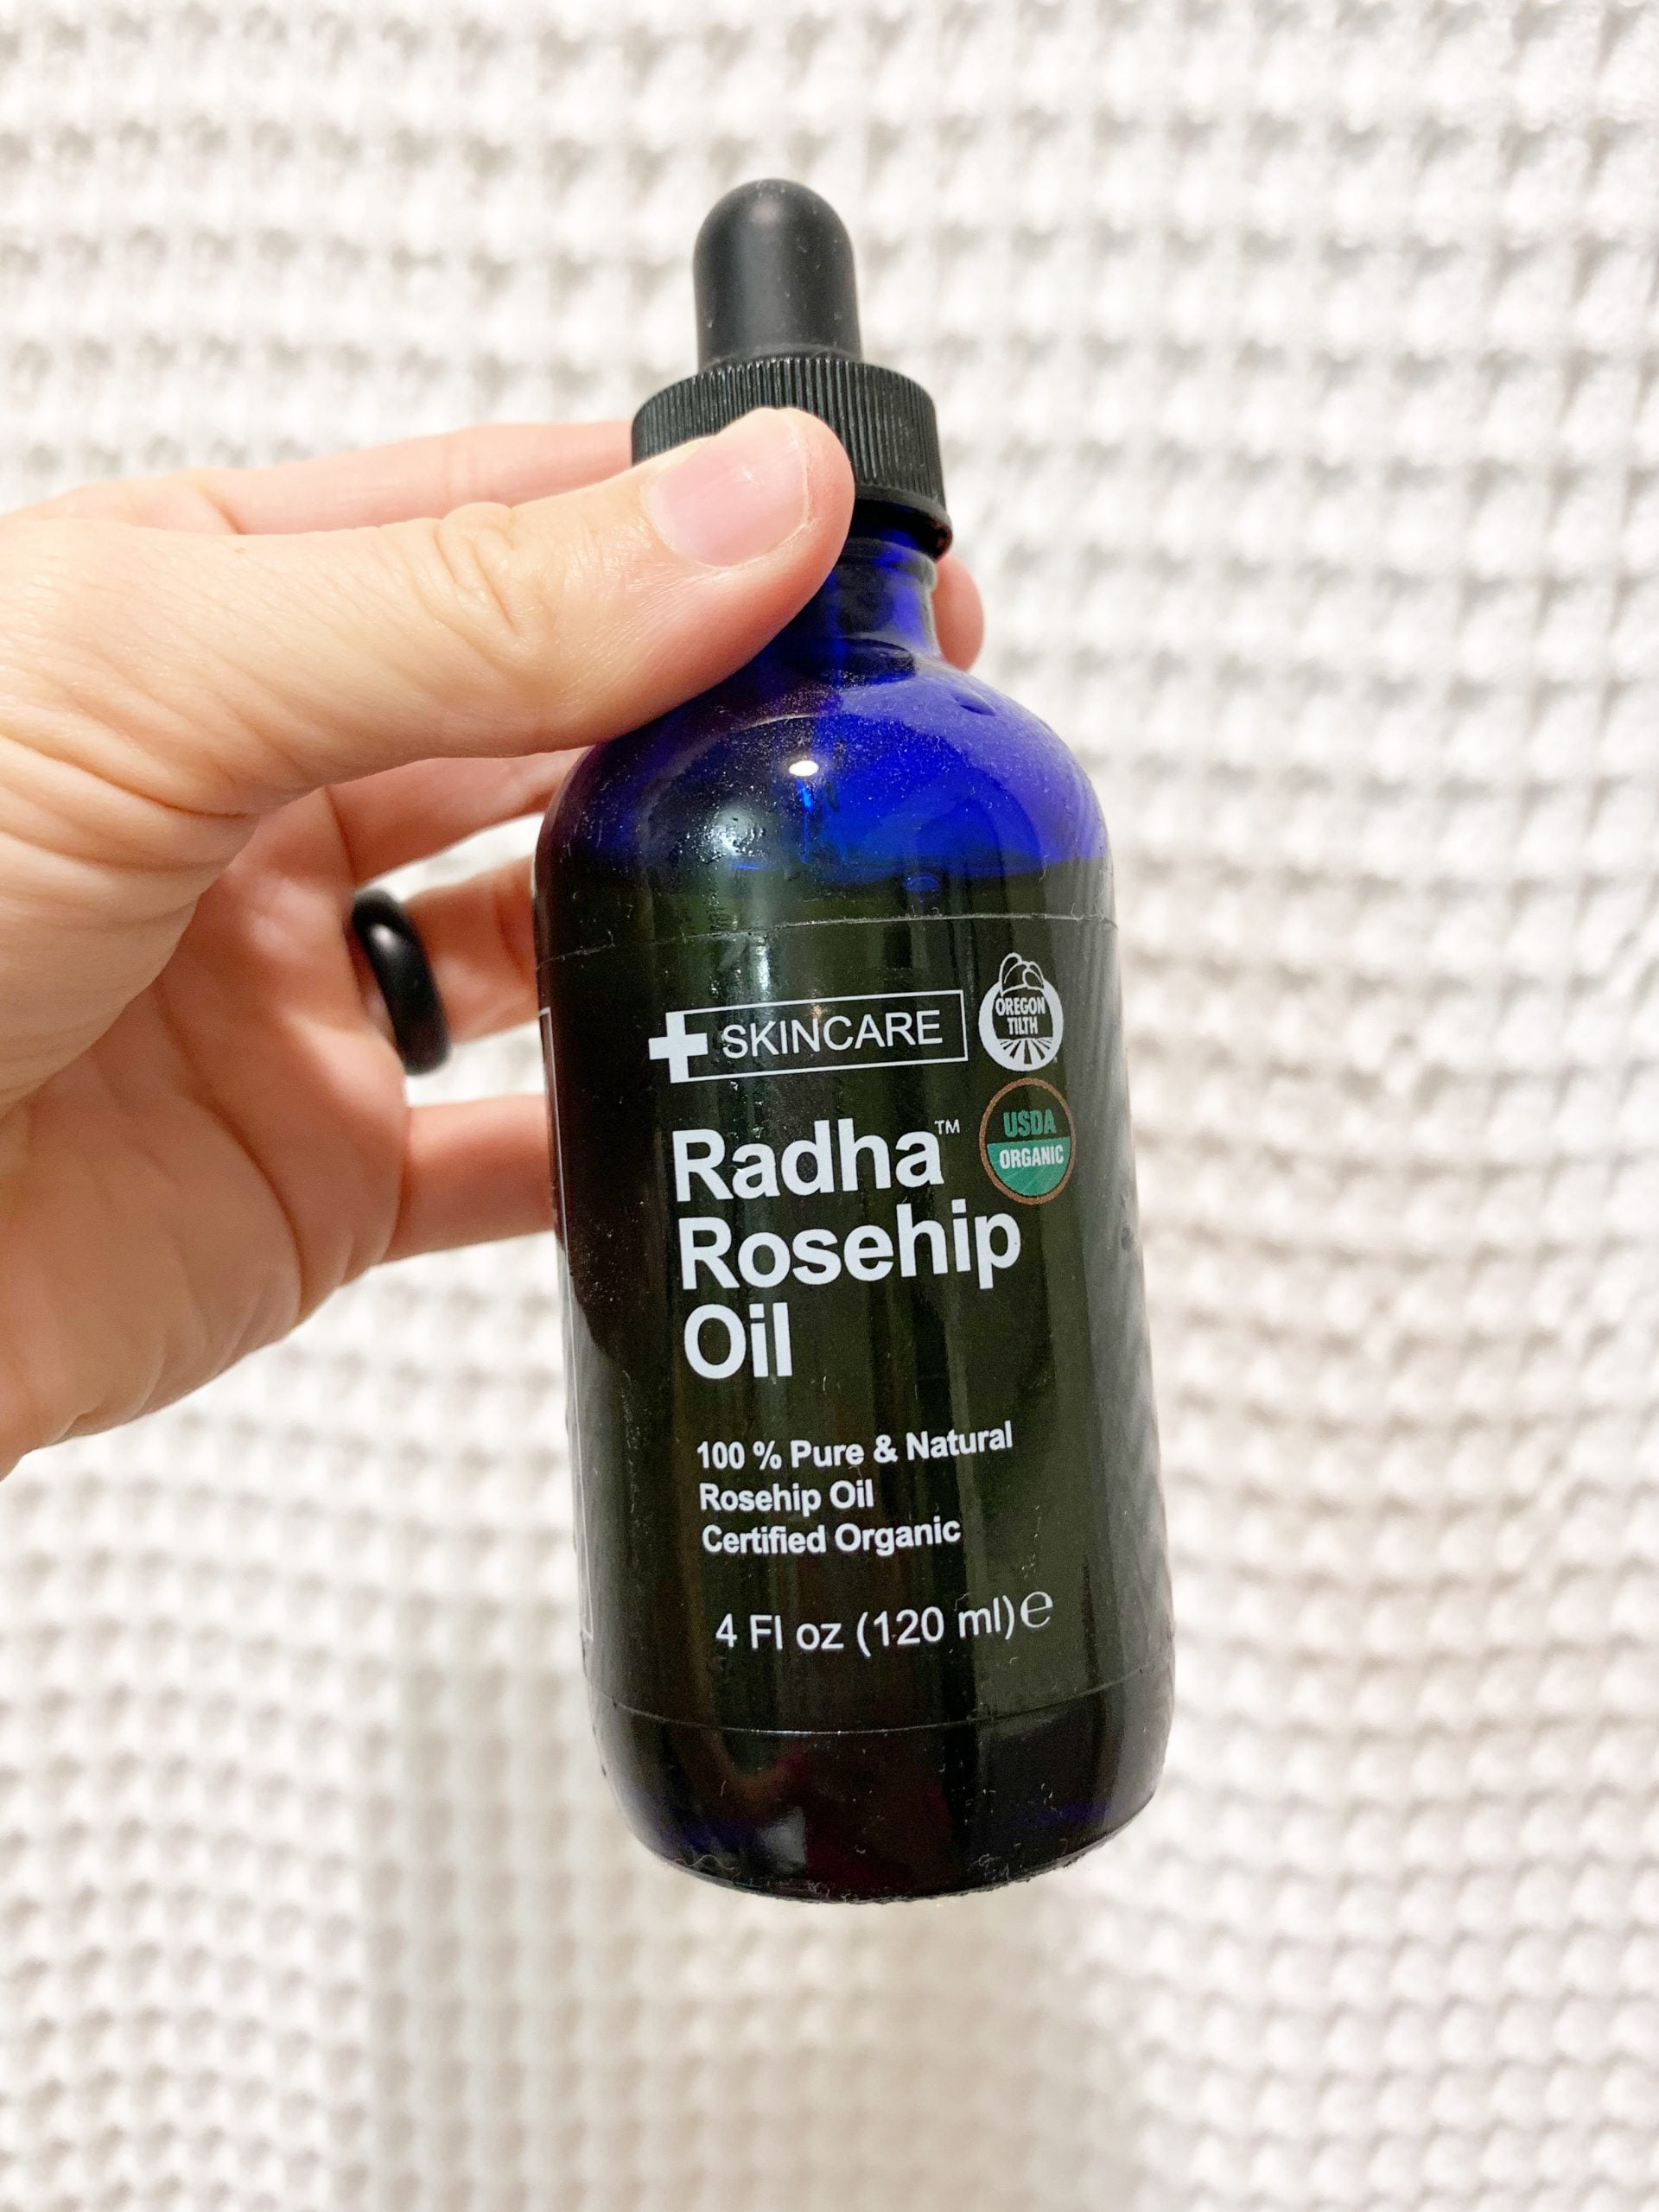 Radha Rosehip Oil - How Rosehip Seed Oil Changed My Skin - Have you heard of this skincare super charge? I'm sharing why rosehip oil is a beauty must-have! | Rosehip Seed Oil Benefits - Rosehip Seed Oil For Skin - Rosehip OilÂ 